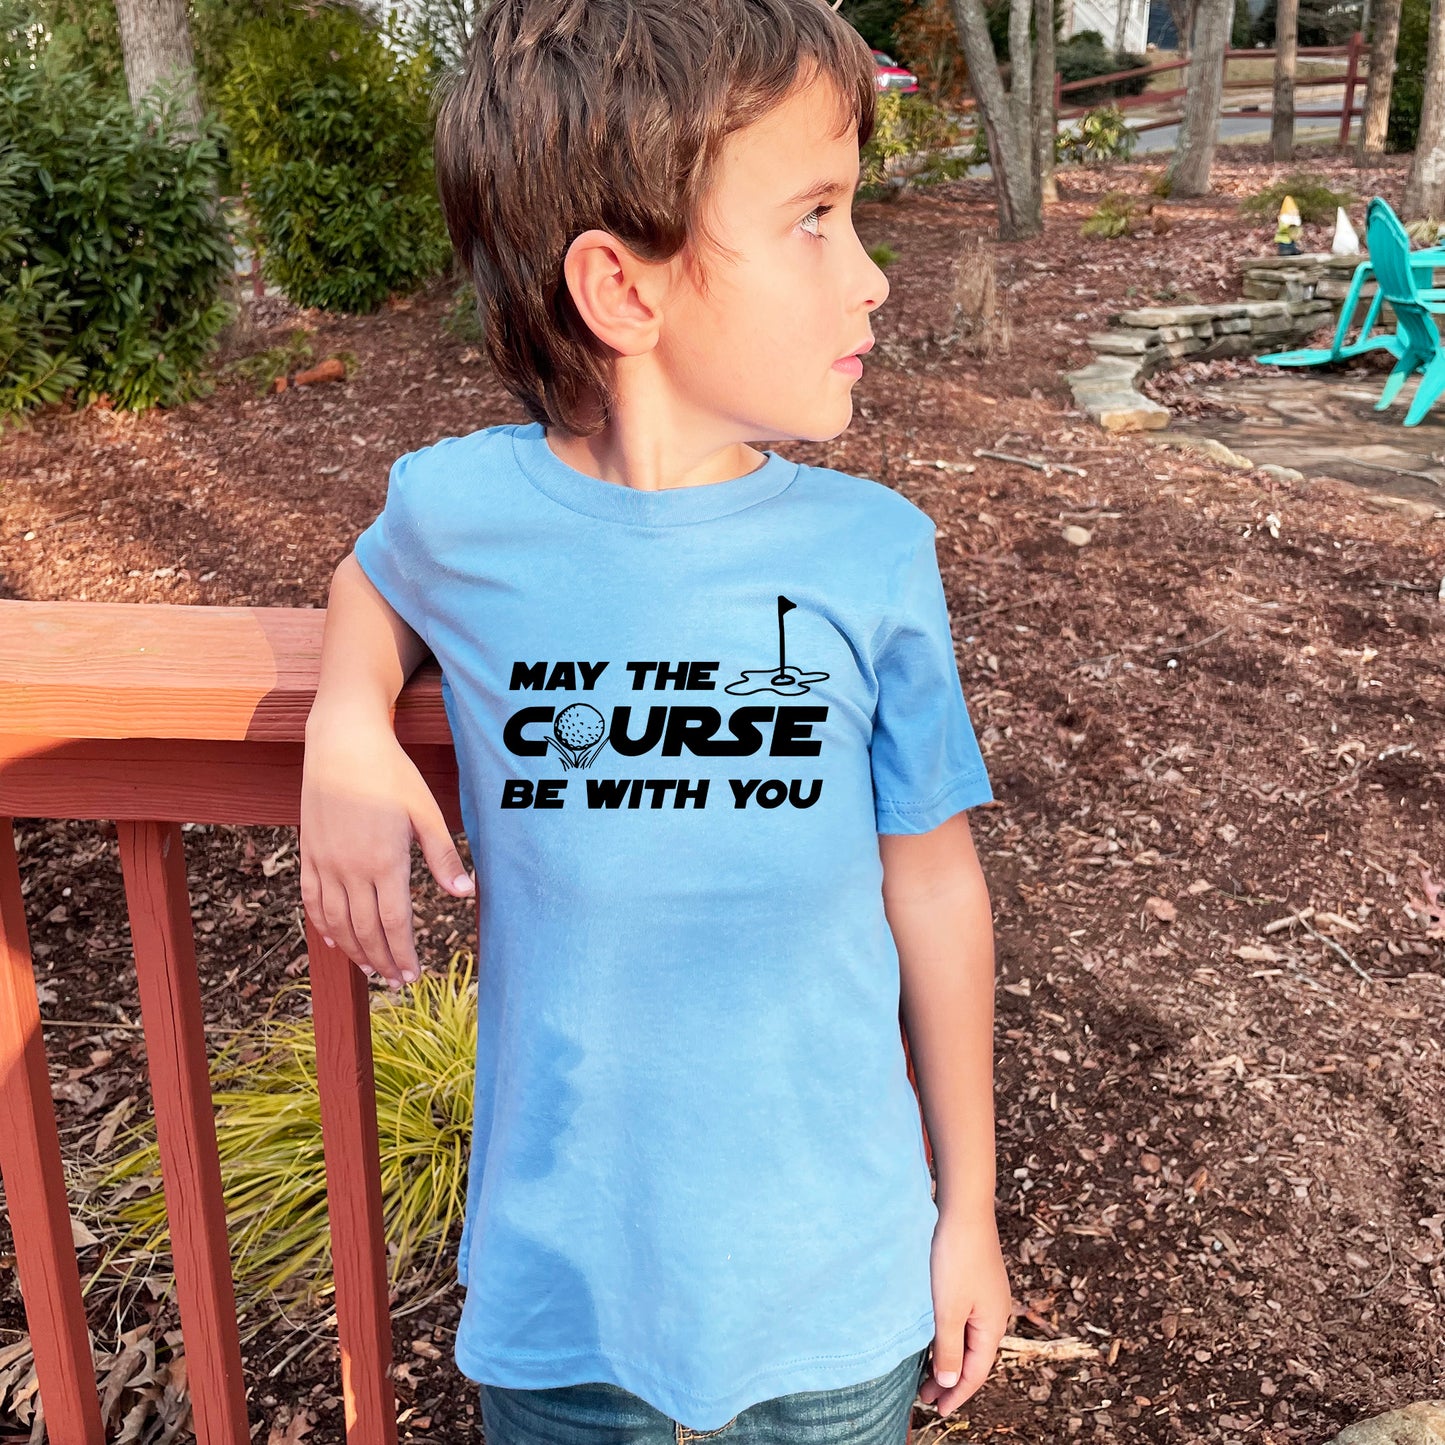 a young boy wearing a blue shirt that says may the course be with you